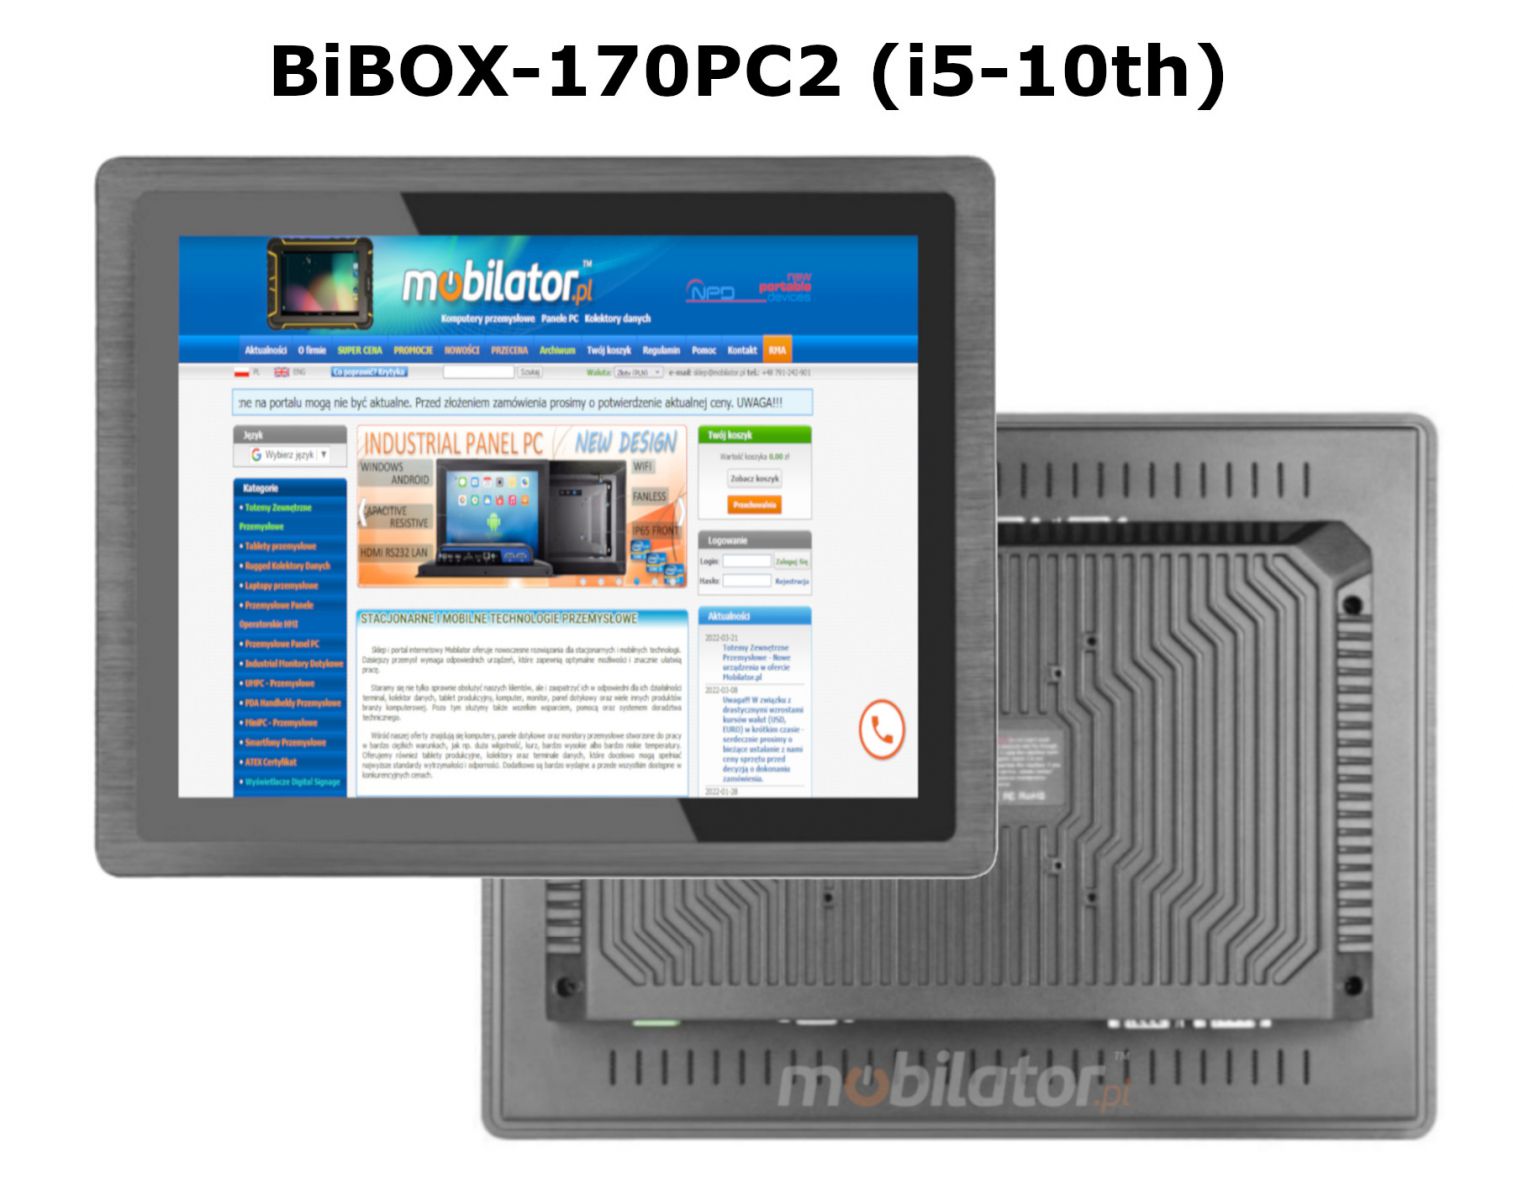 BIBOX-170PC2 with WiFi and Bluetooth and with WINDOWS 10 PRO license